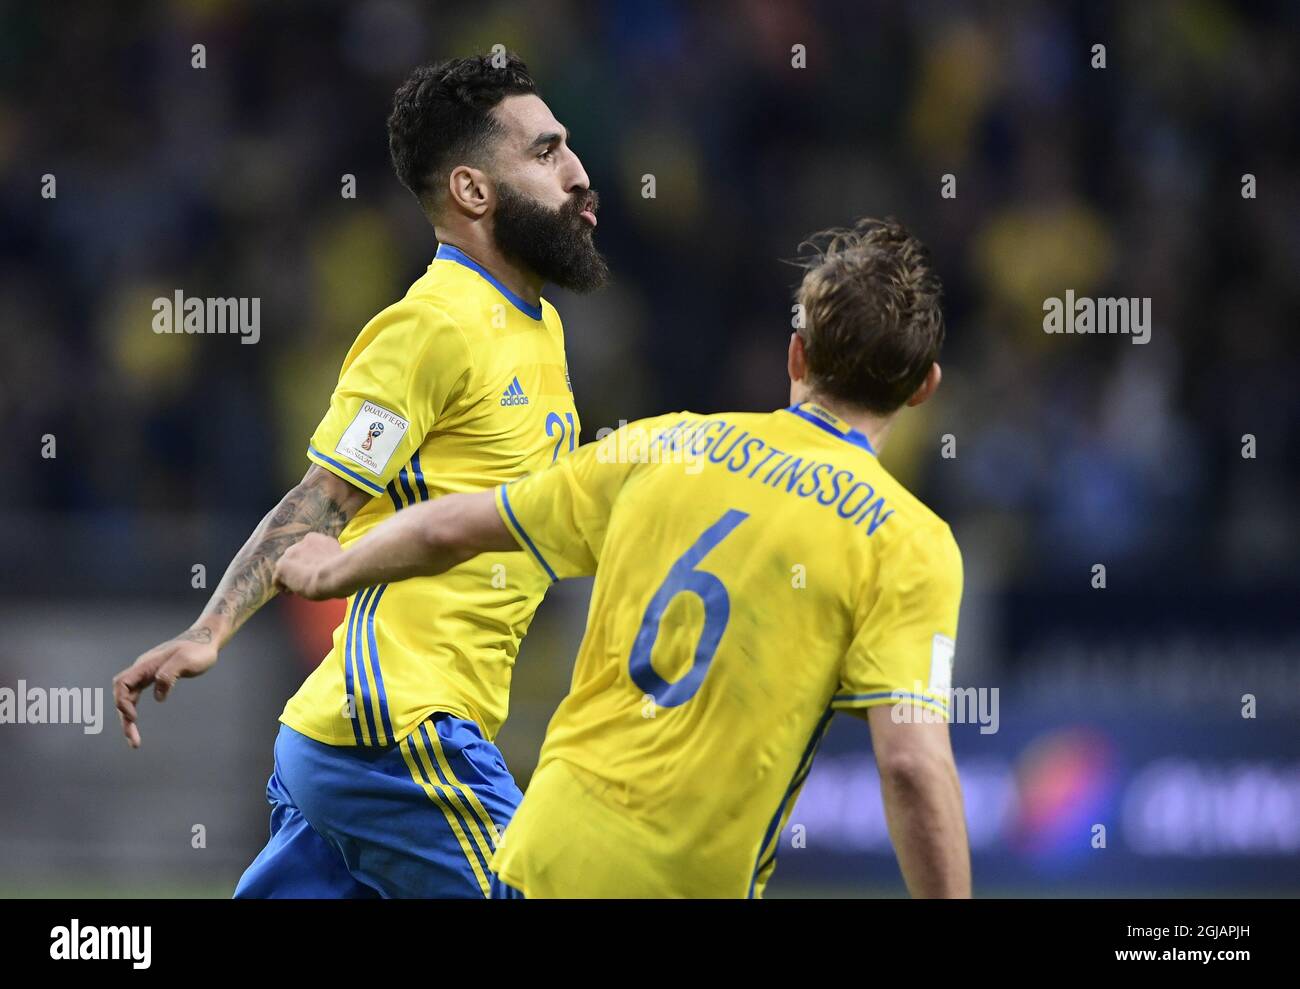 Sweden's Jimmy Durmaz (L) celebrates scoring with teammate Ludwig Augustinsson during the FIFA World Cup 2018 group A qualifying soccer match between Sweden and France on June 9, 2017 at Friends Arena in Solna, Stockholm. Photo Marcus Ericsson / TT / code 11470  Stock Photo